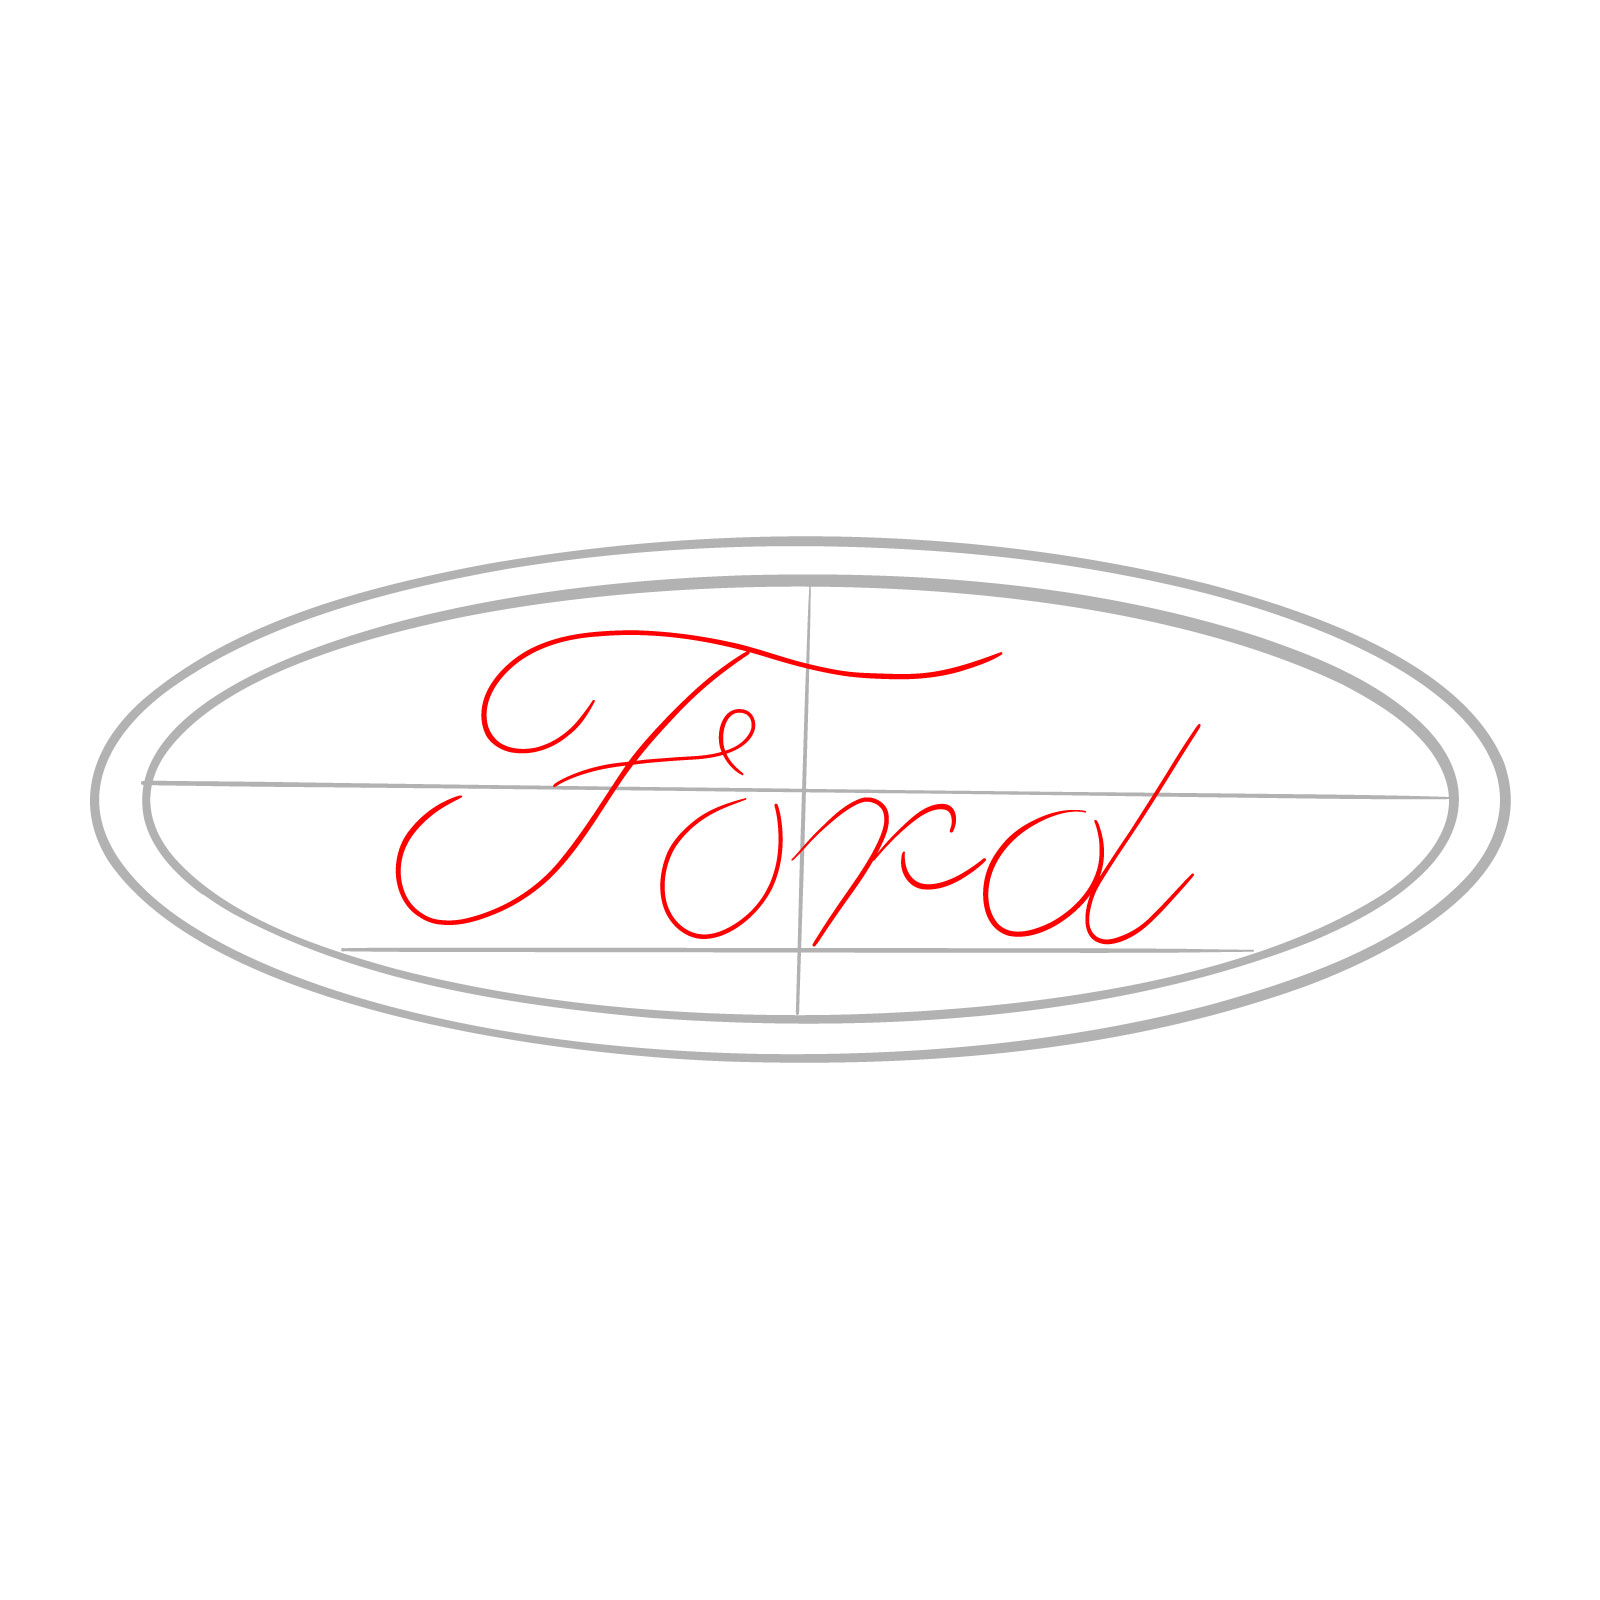 How to draw the Ford logo - step 03